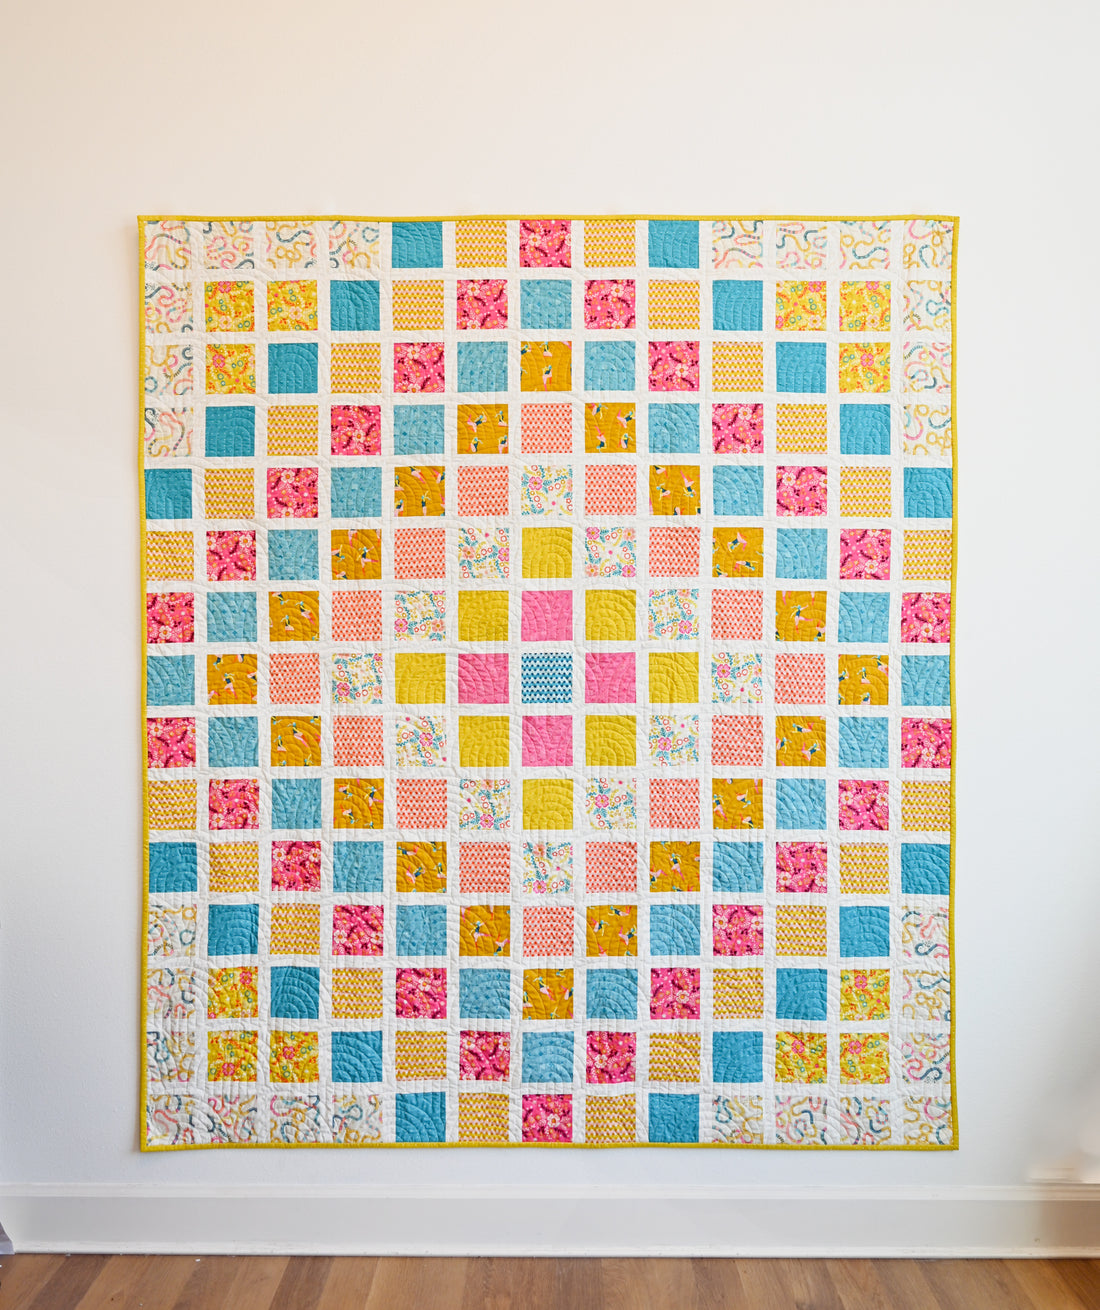 The Fiona Quilt PDF Pattern